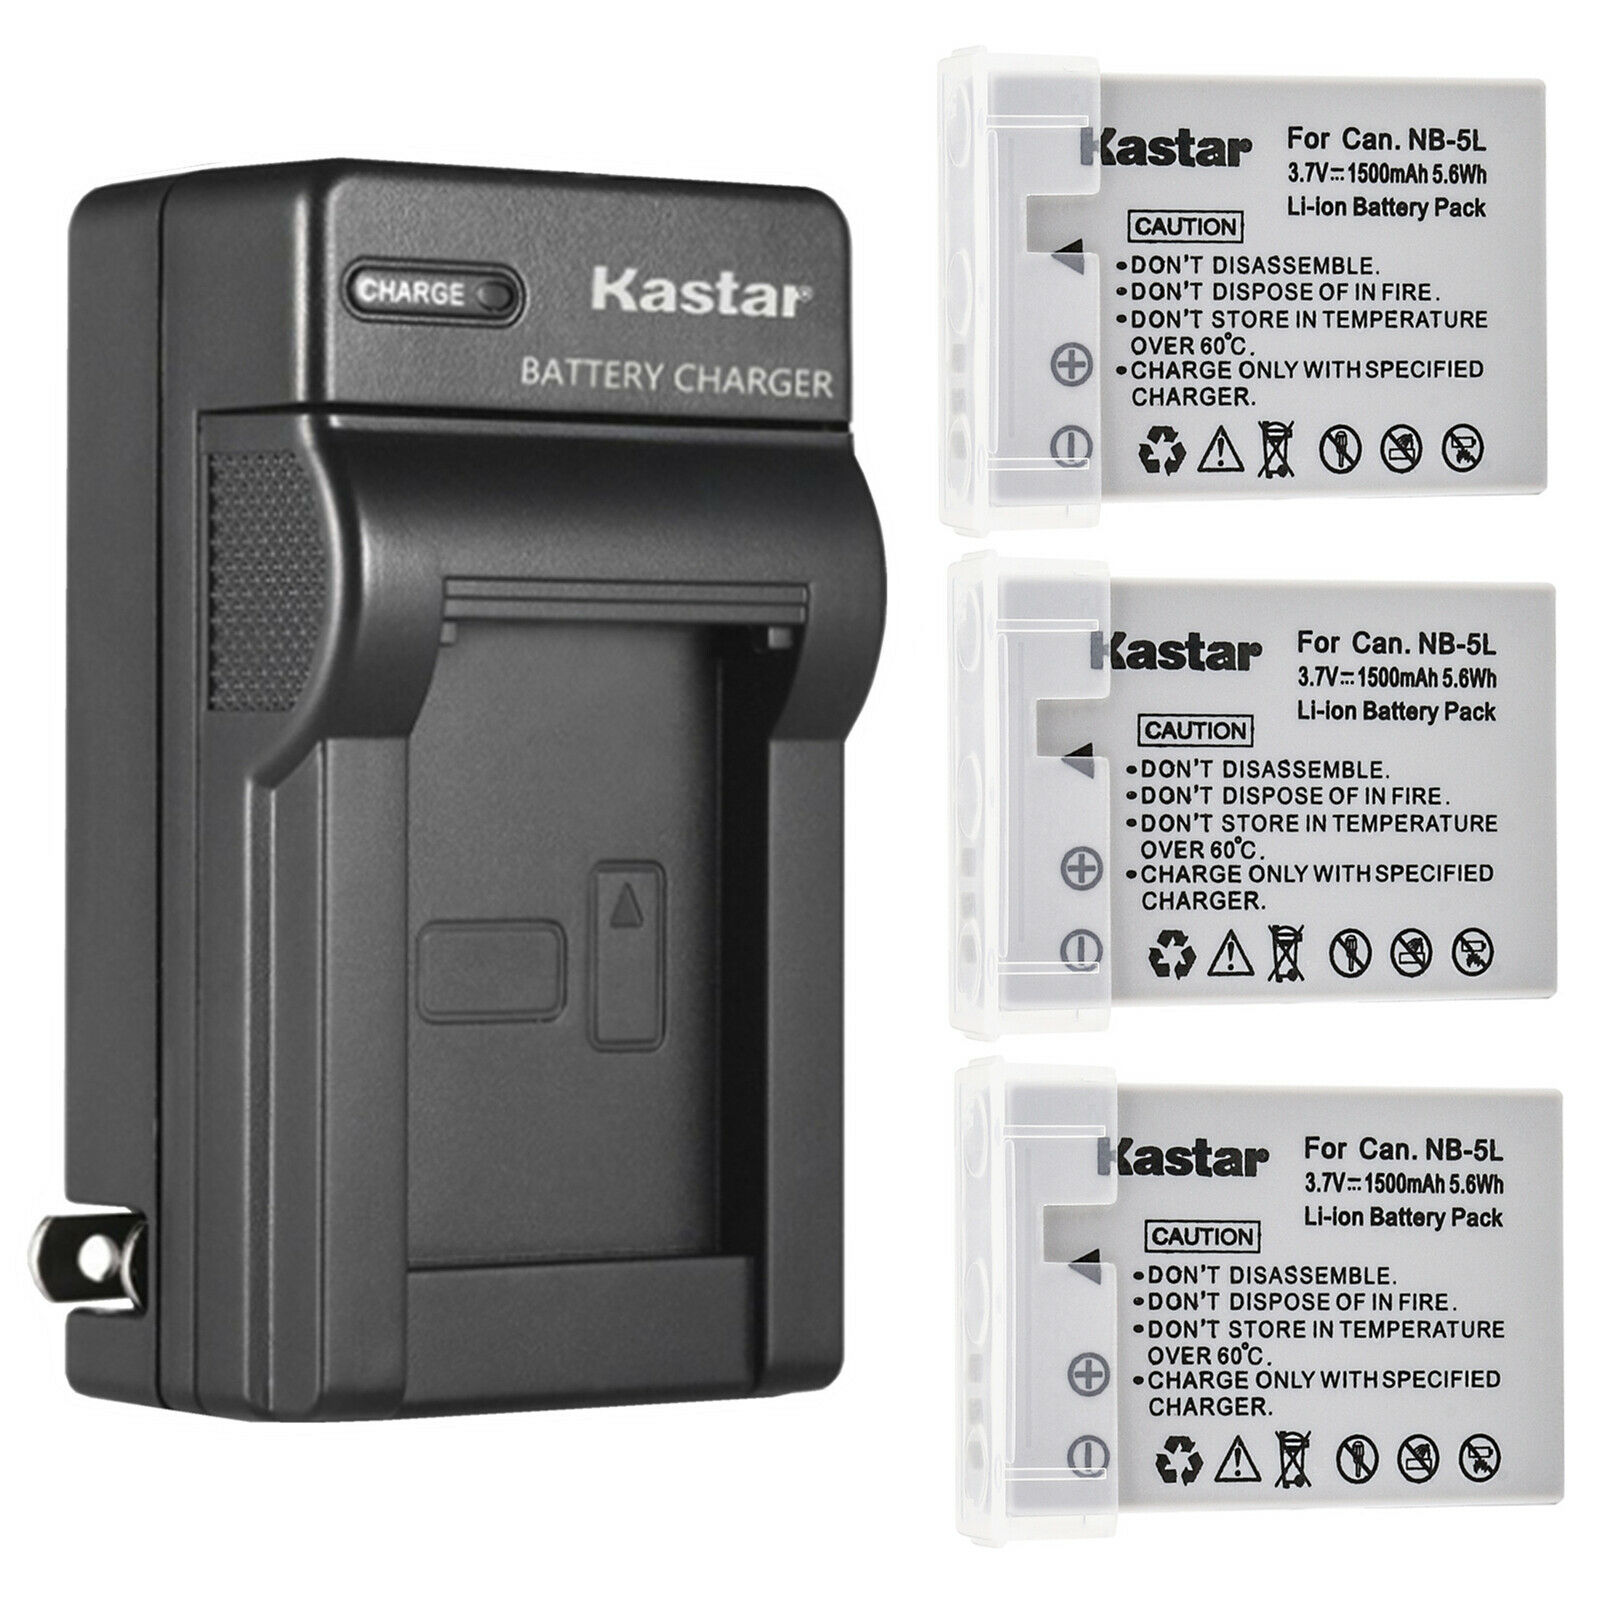 Kastar 3-Pack Battery and AC Wall Charger Replacement for Canon PowerShot SD850 IS, PowerShot SD870 IS, PowerShot SD880 IS, PowerShot SD890 IS, PowerShot SD900 IS, PowerShot SD950 IS Cameras - image 1 of 5